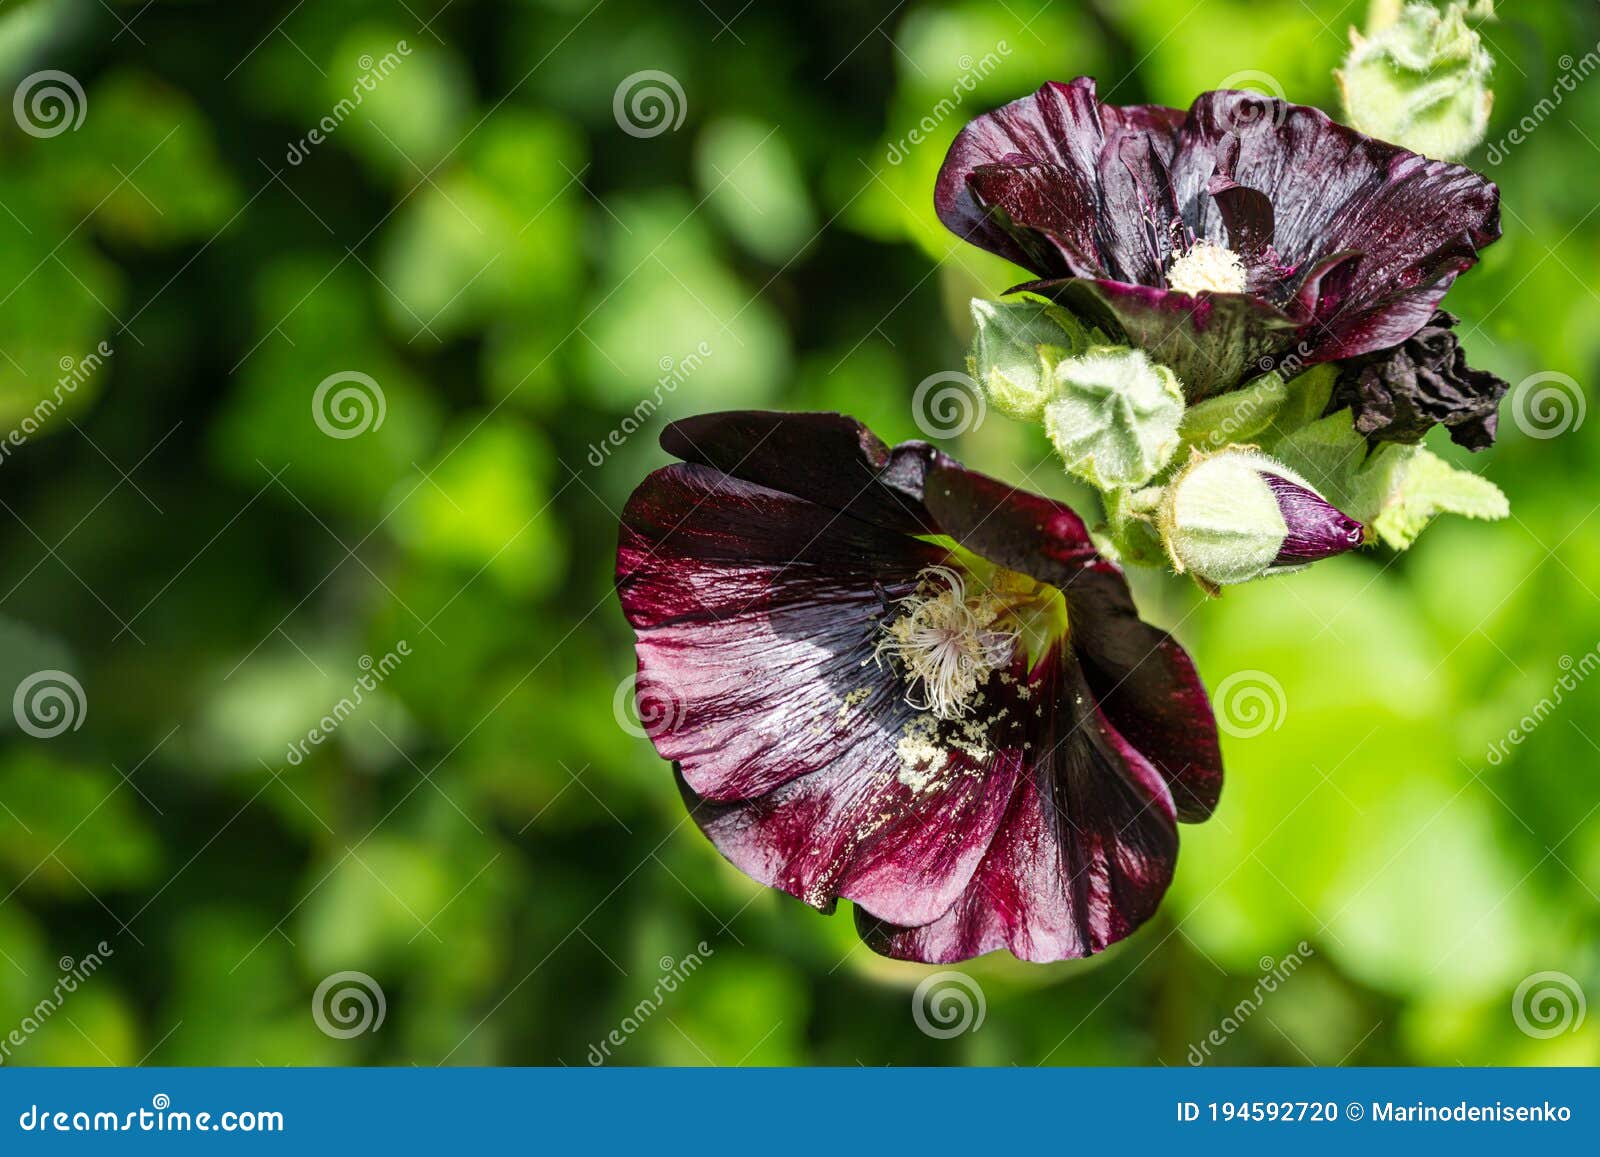 Alcea Rosea Nigra Is Commonly Known As Black Hollyhock Tall Flower Black Malva With Huge Dark Flowers Decorate Any Garden Stock Photo Image Of Green Beauty 194592720